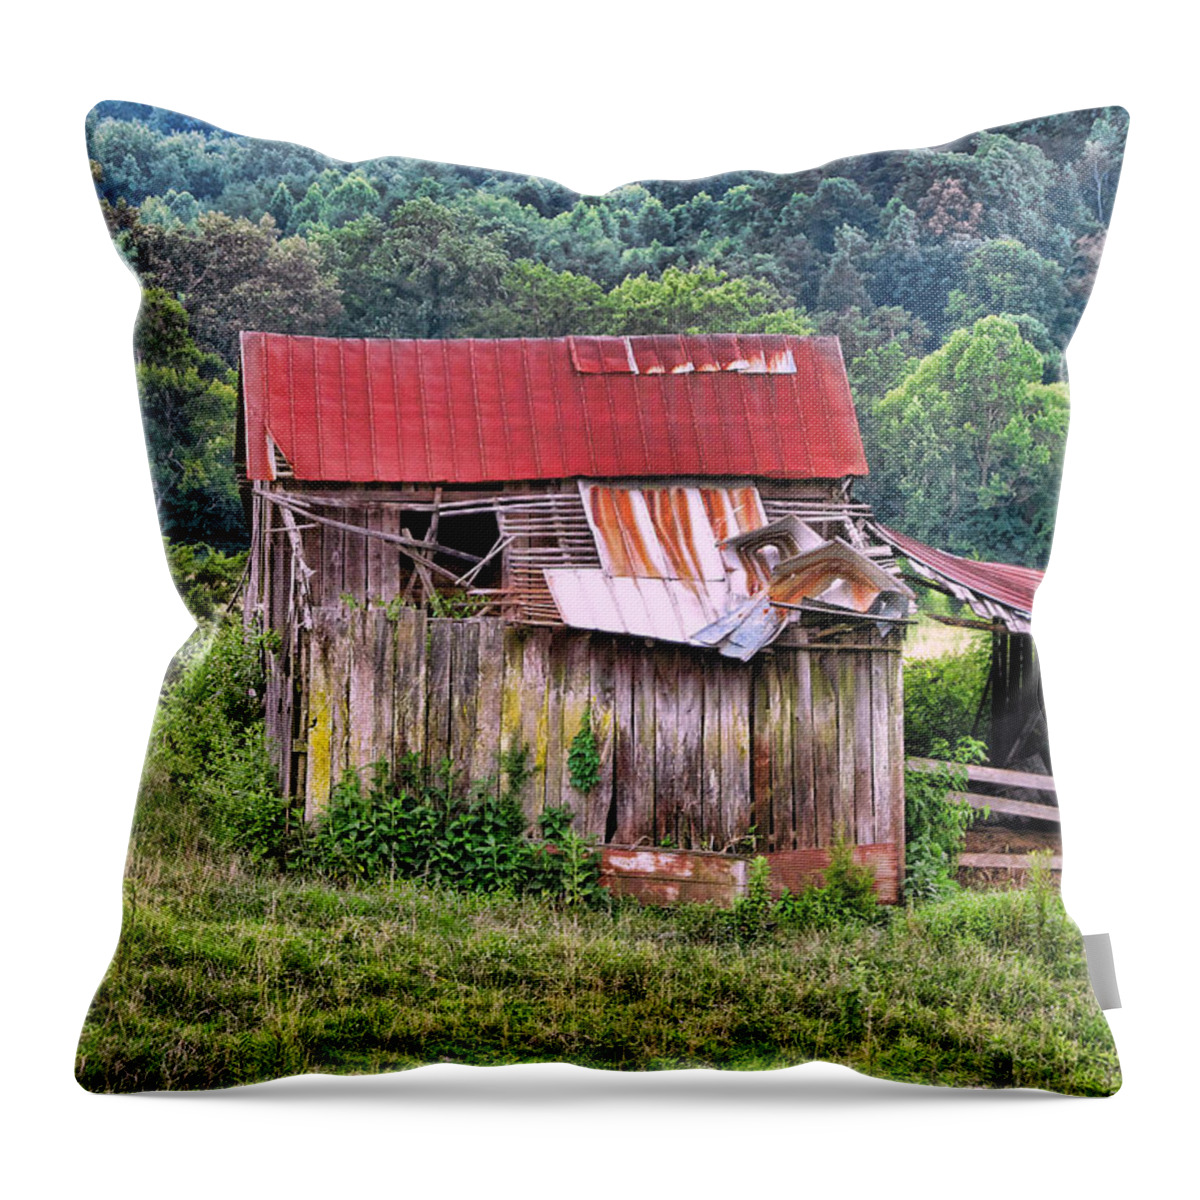 Victor Montgomery Throw Pillow featuring the photograph Weathered Barn by Vic Montgomery